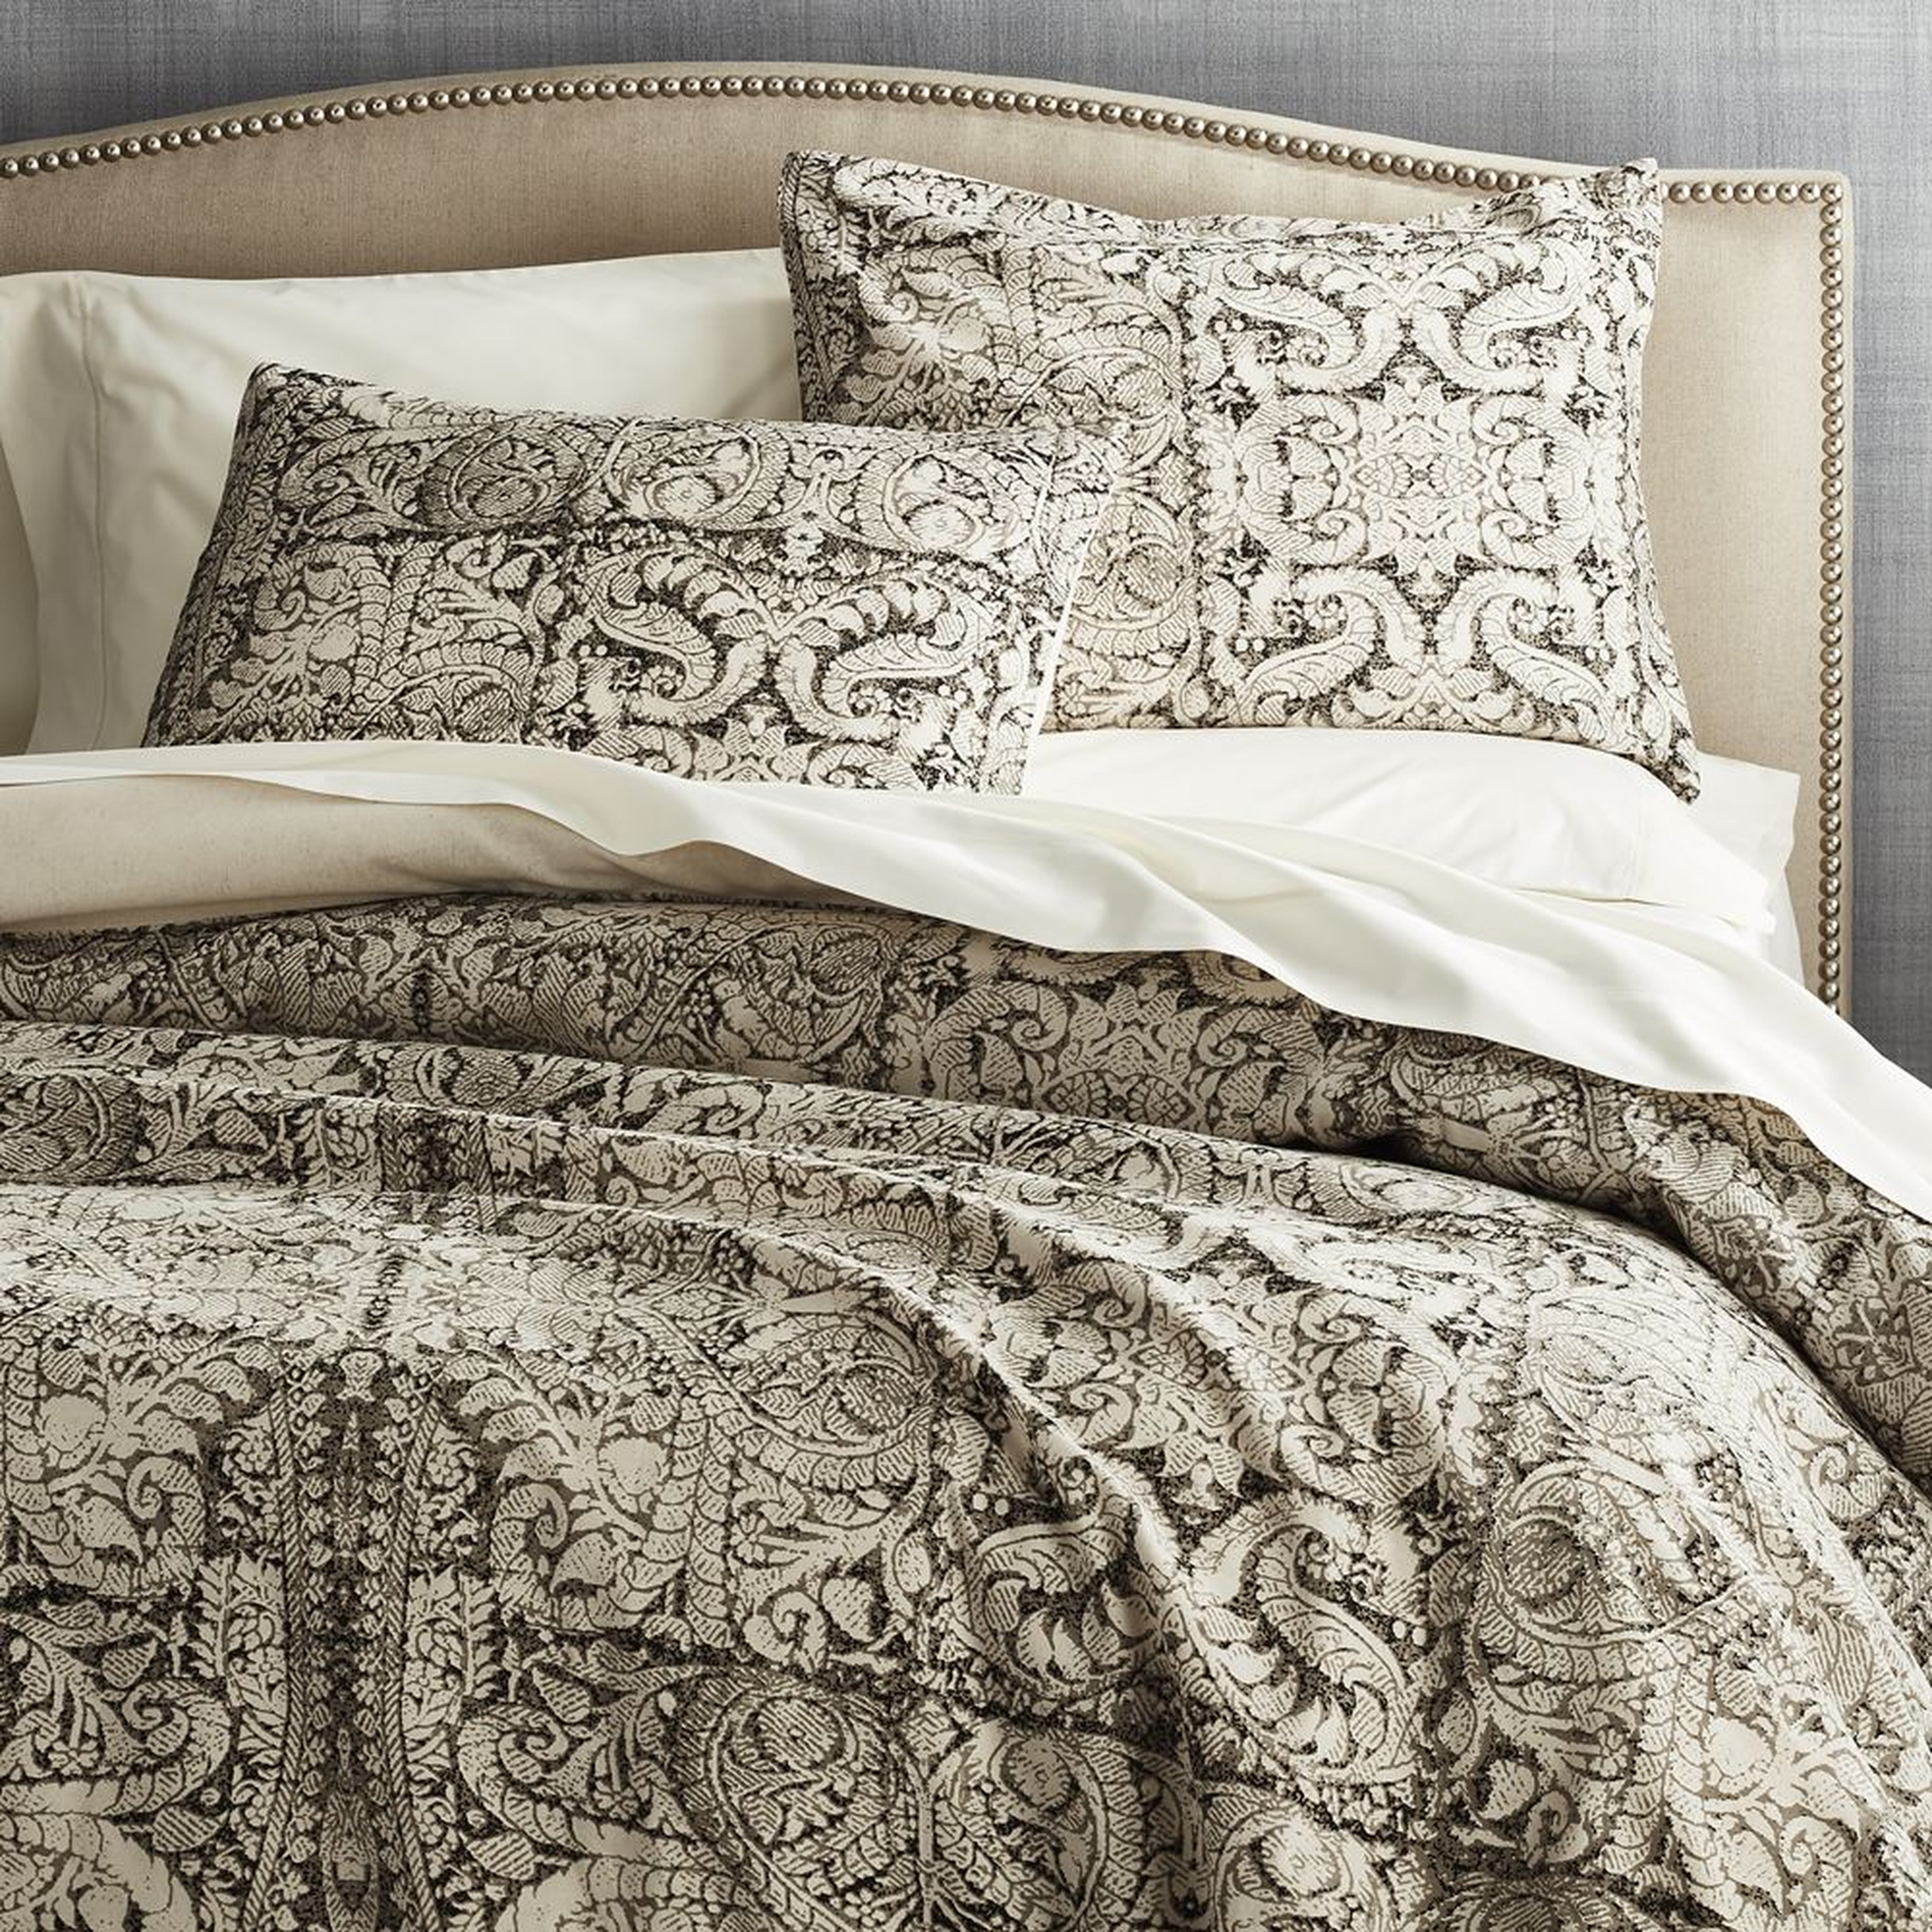 Linley Charcoal Damask Print Duvet Cover King - Crate and Barrel